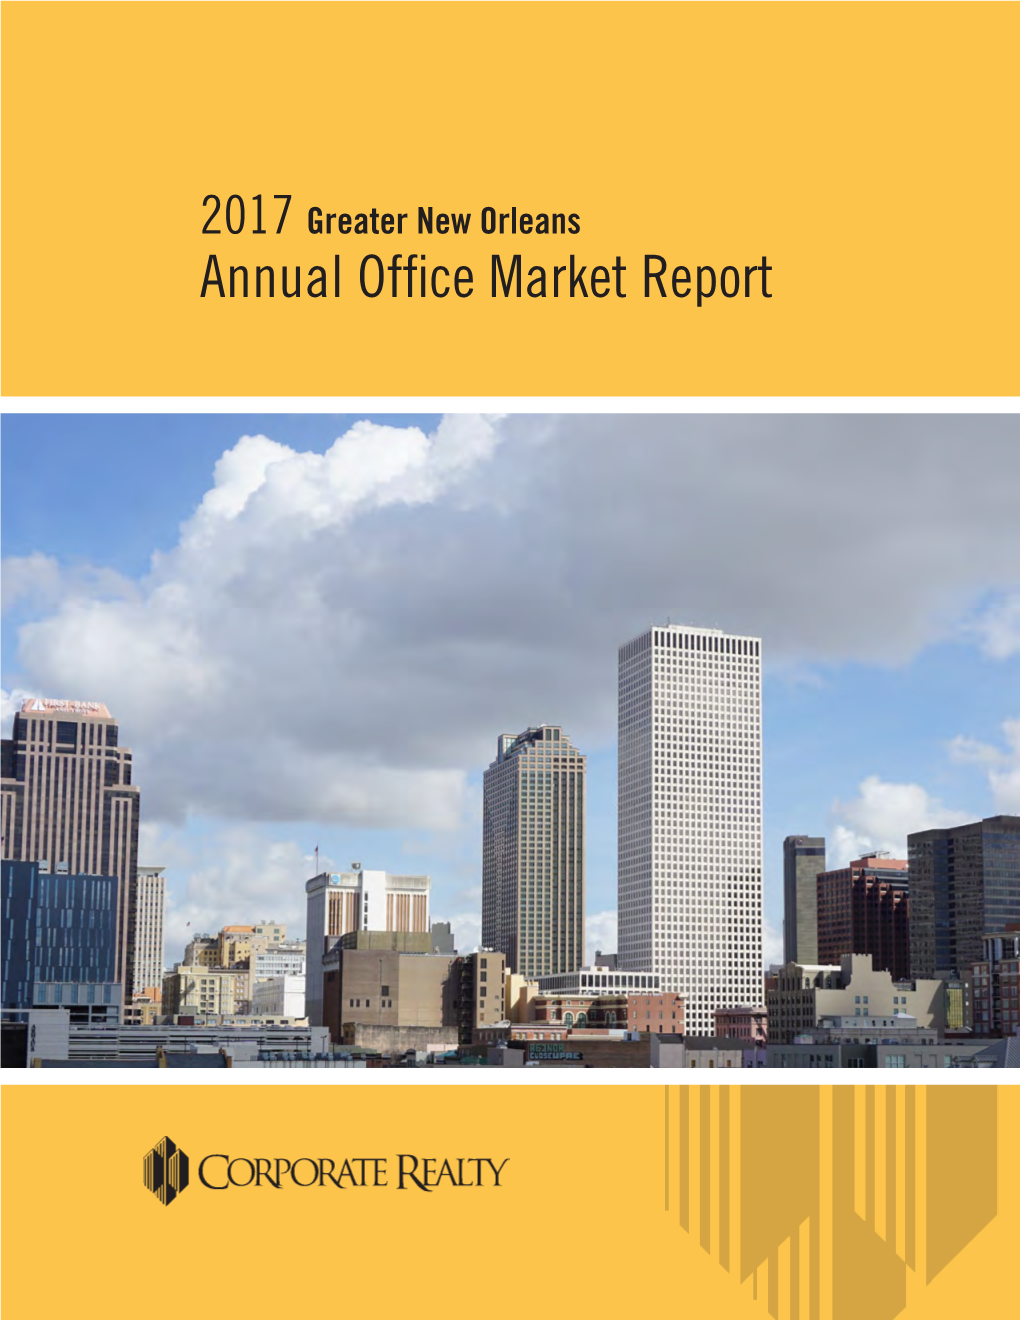 Annual Office Market Report Corporate Realty, Inc